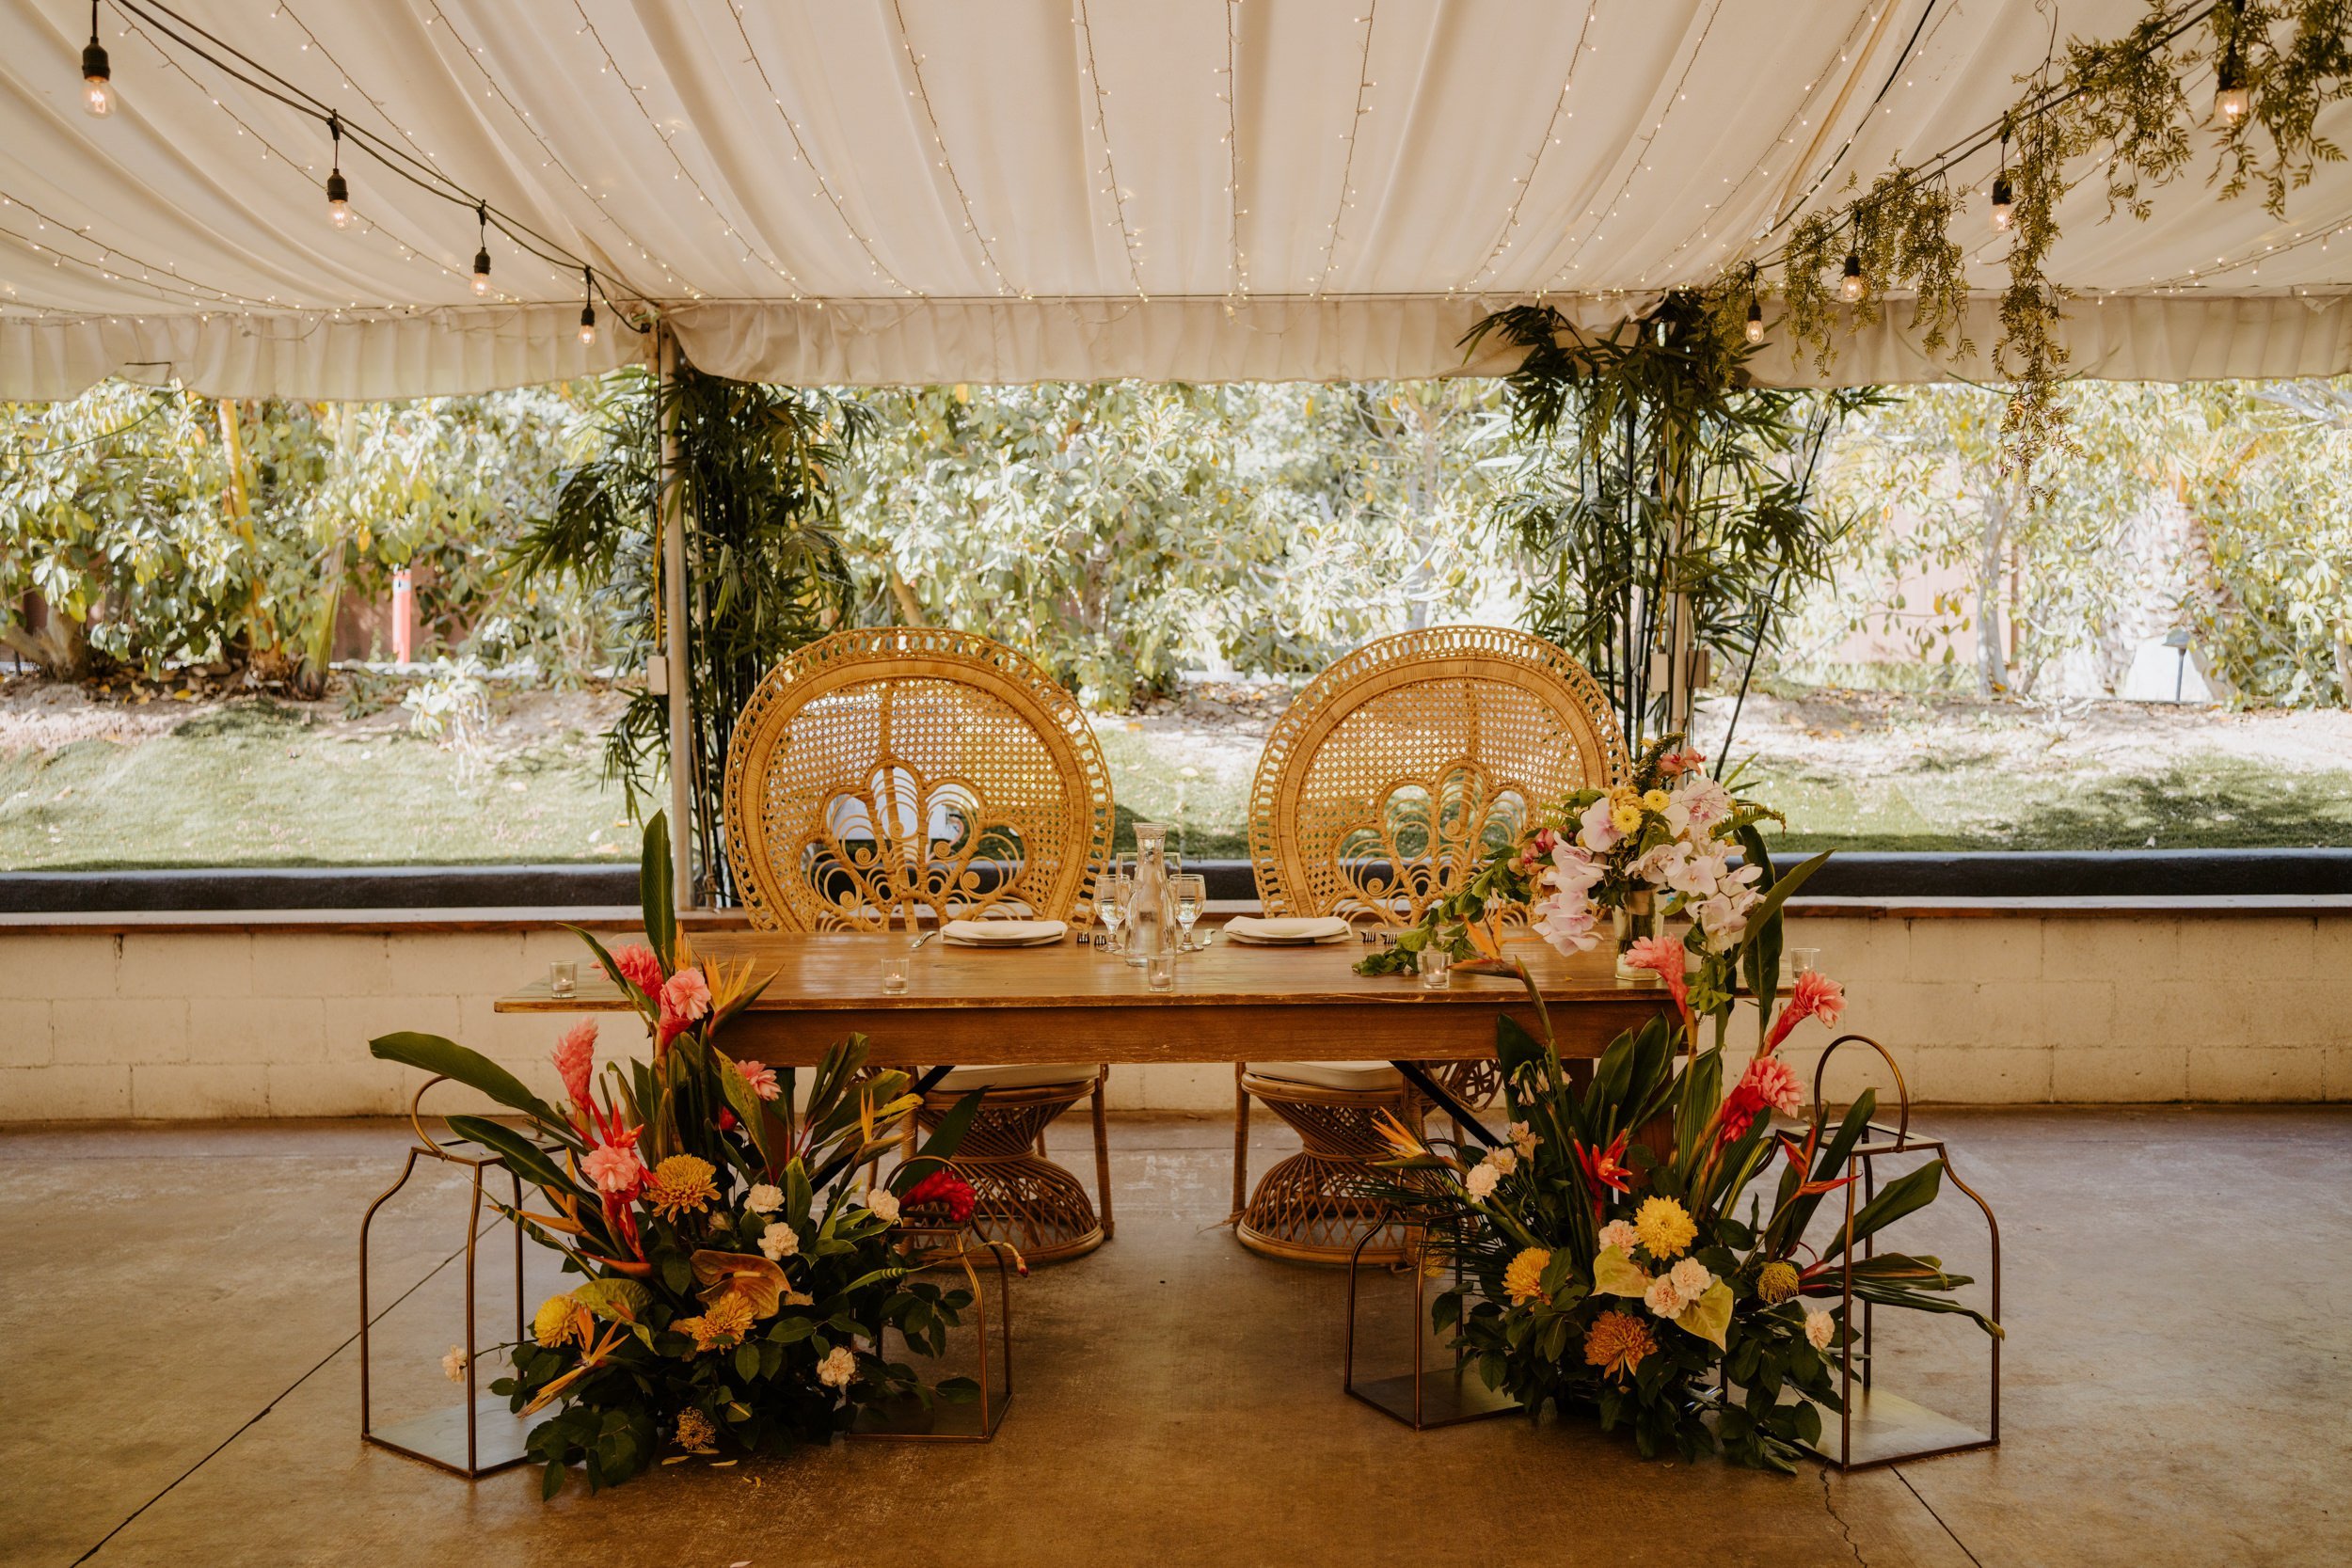 Tropical boho inspired wedding sweetheart table with peacock chairs. Botanica Oceanside wedding reception, San Diego wedding venue, photo by TIda Svy, San Diego wedding photographer